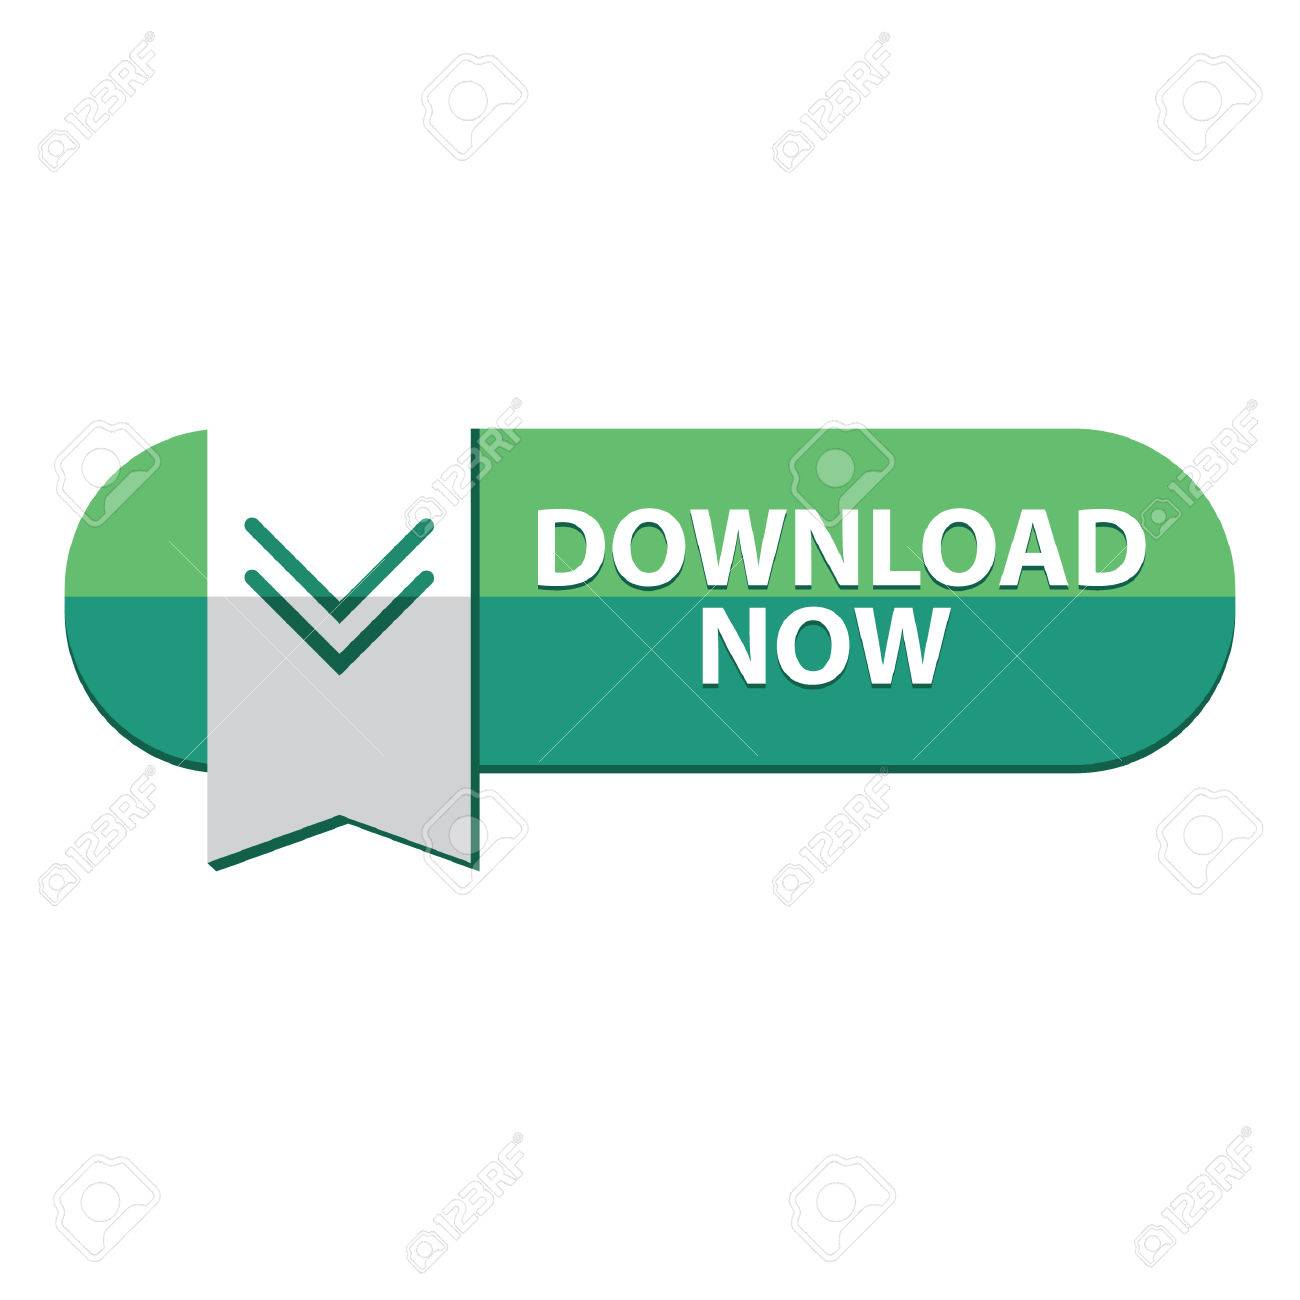 download now button Stock Vector - 53050159